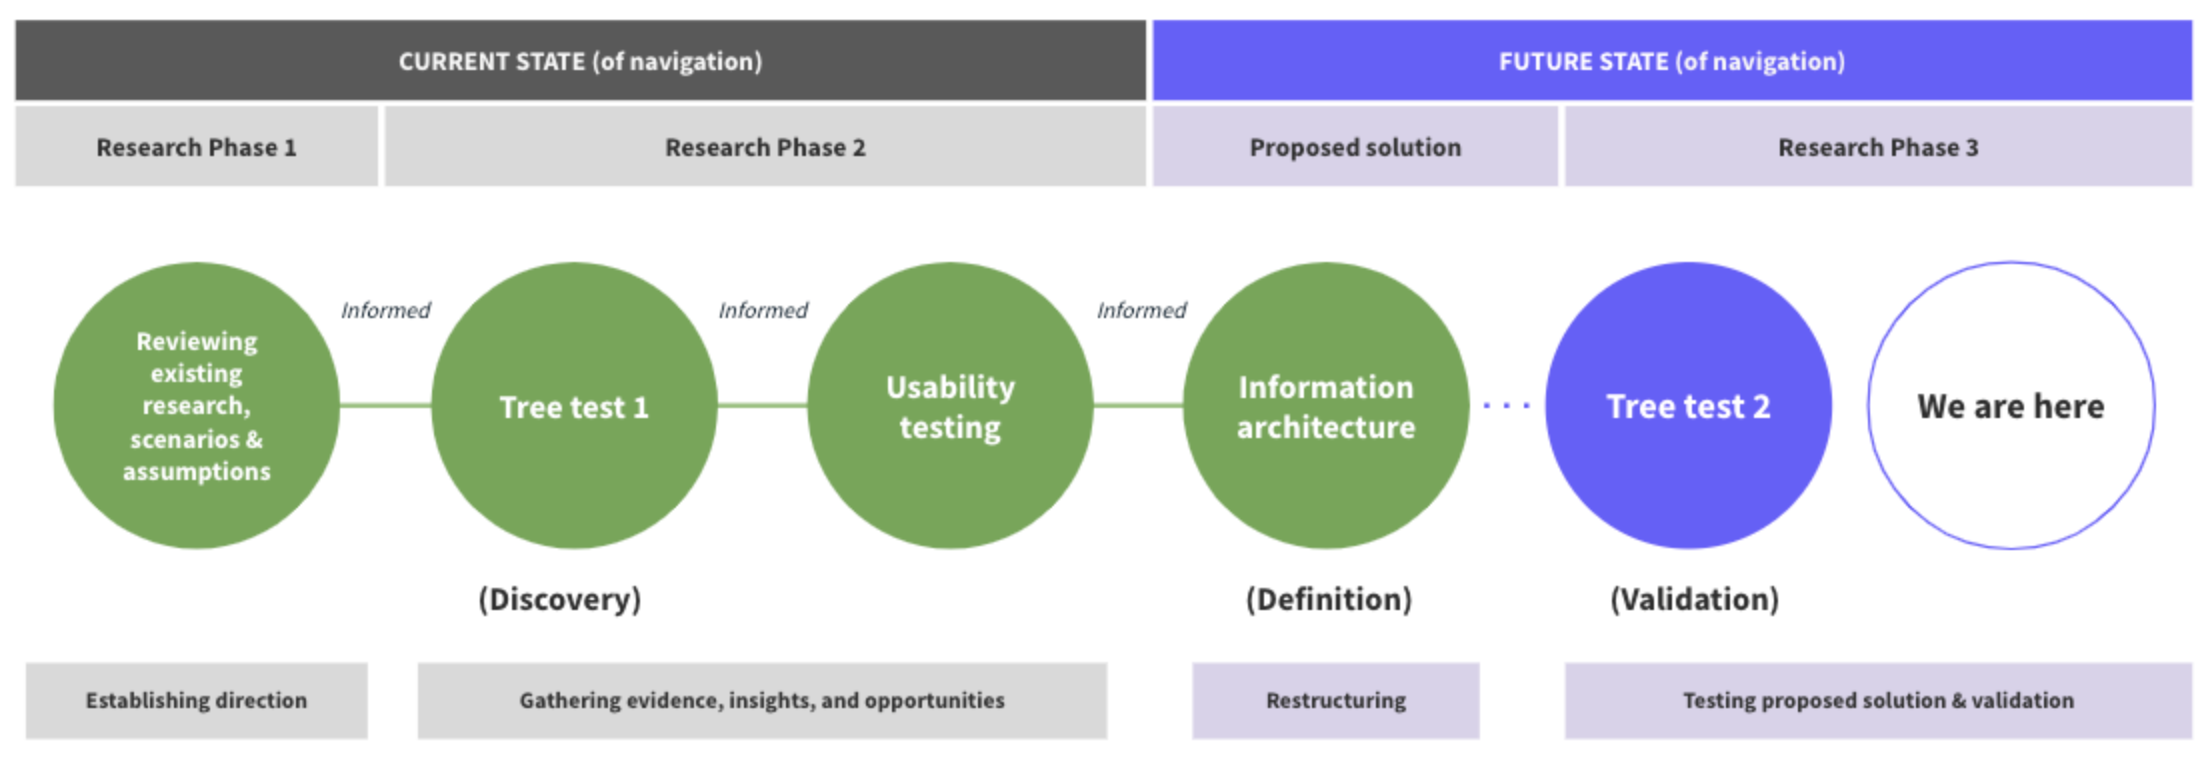 Image showing the UX process, from Reviewing existing research through to Tree test 1, usability testing, information architecture and a second tree test.